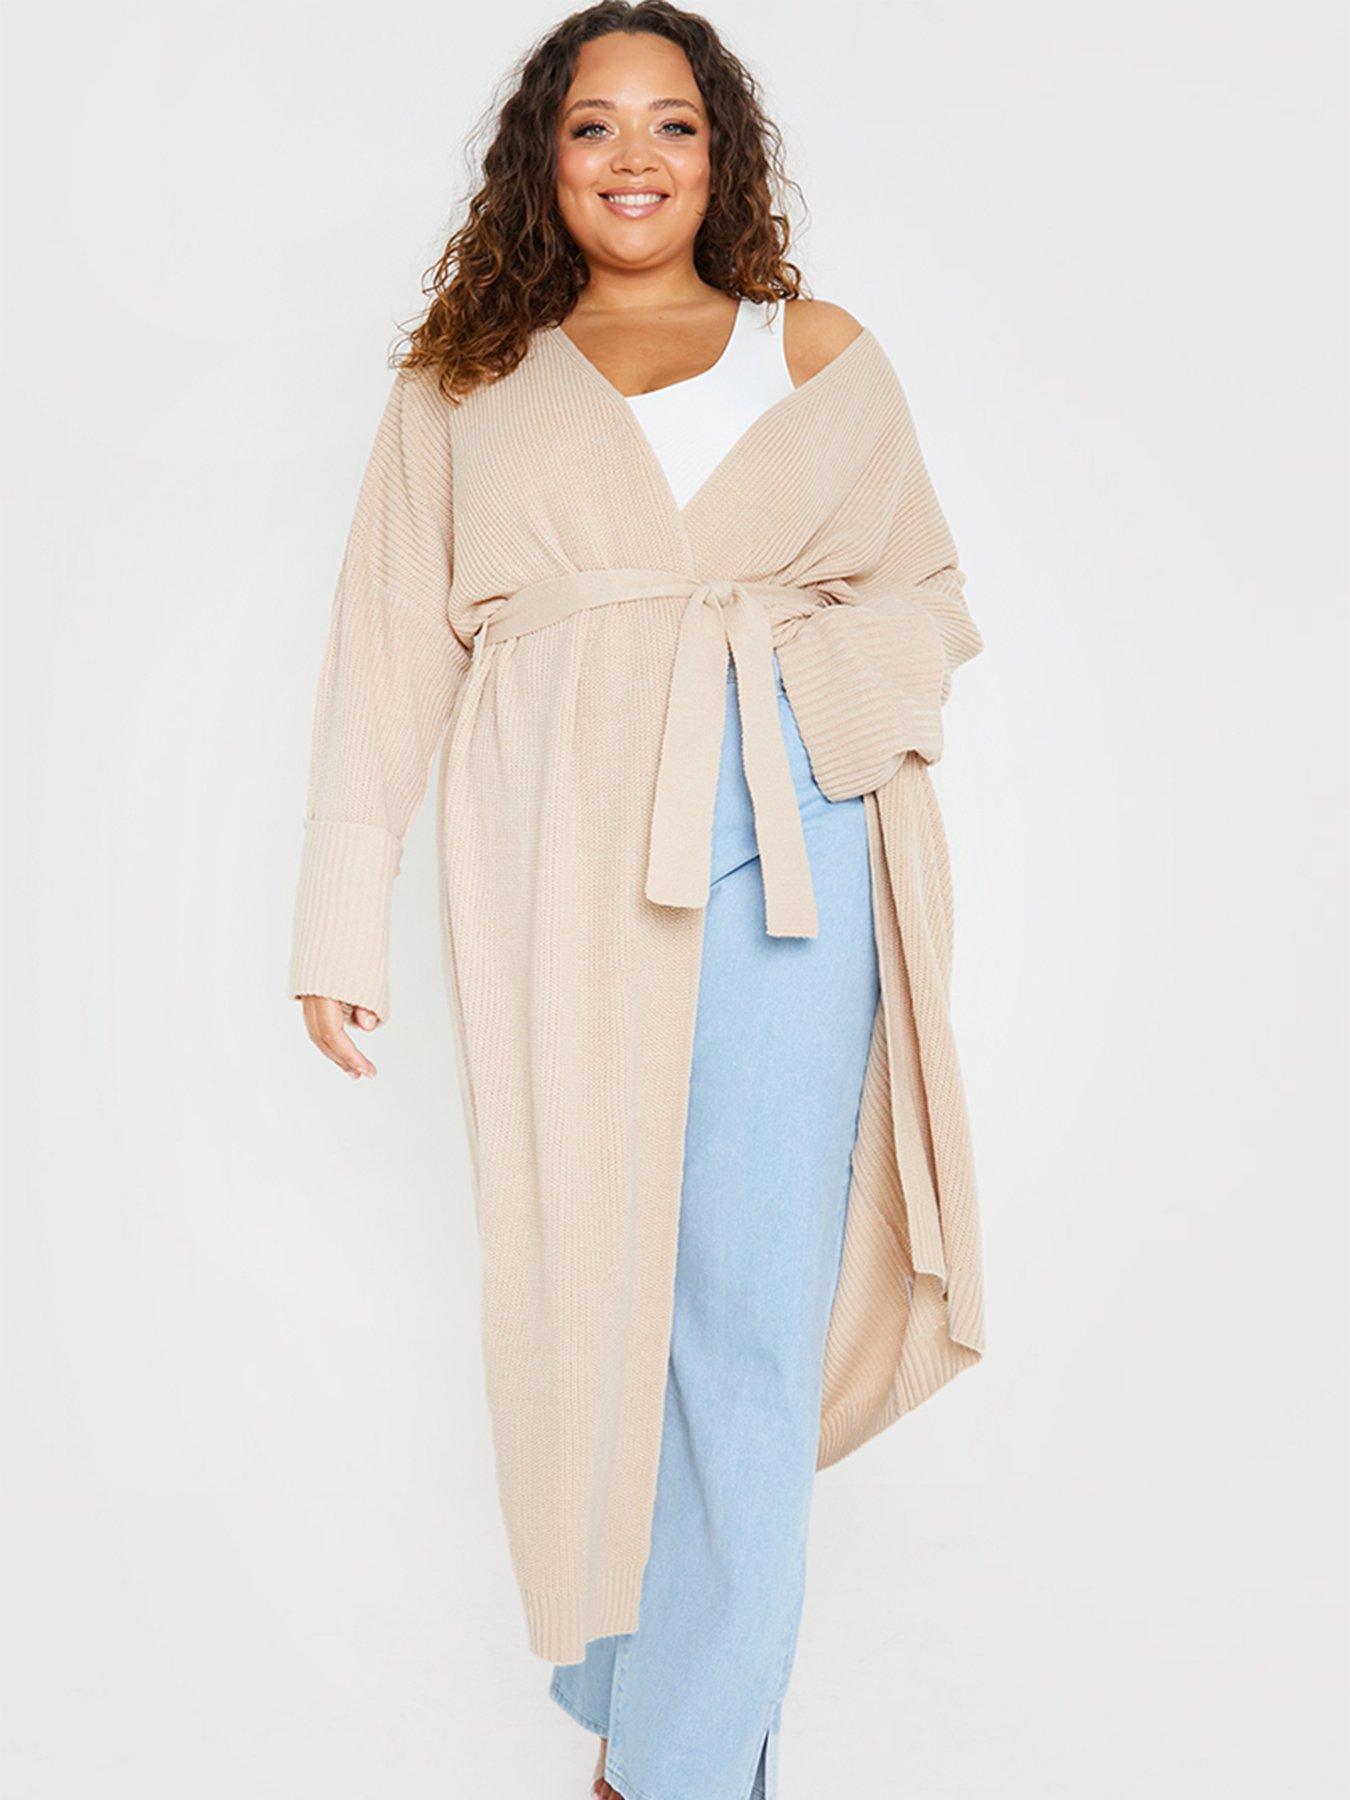  In The Style Curve X Billie Faiers Long Line Turn Back Cuff Cardigan - Stone